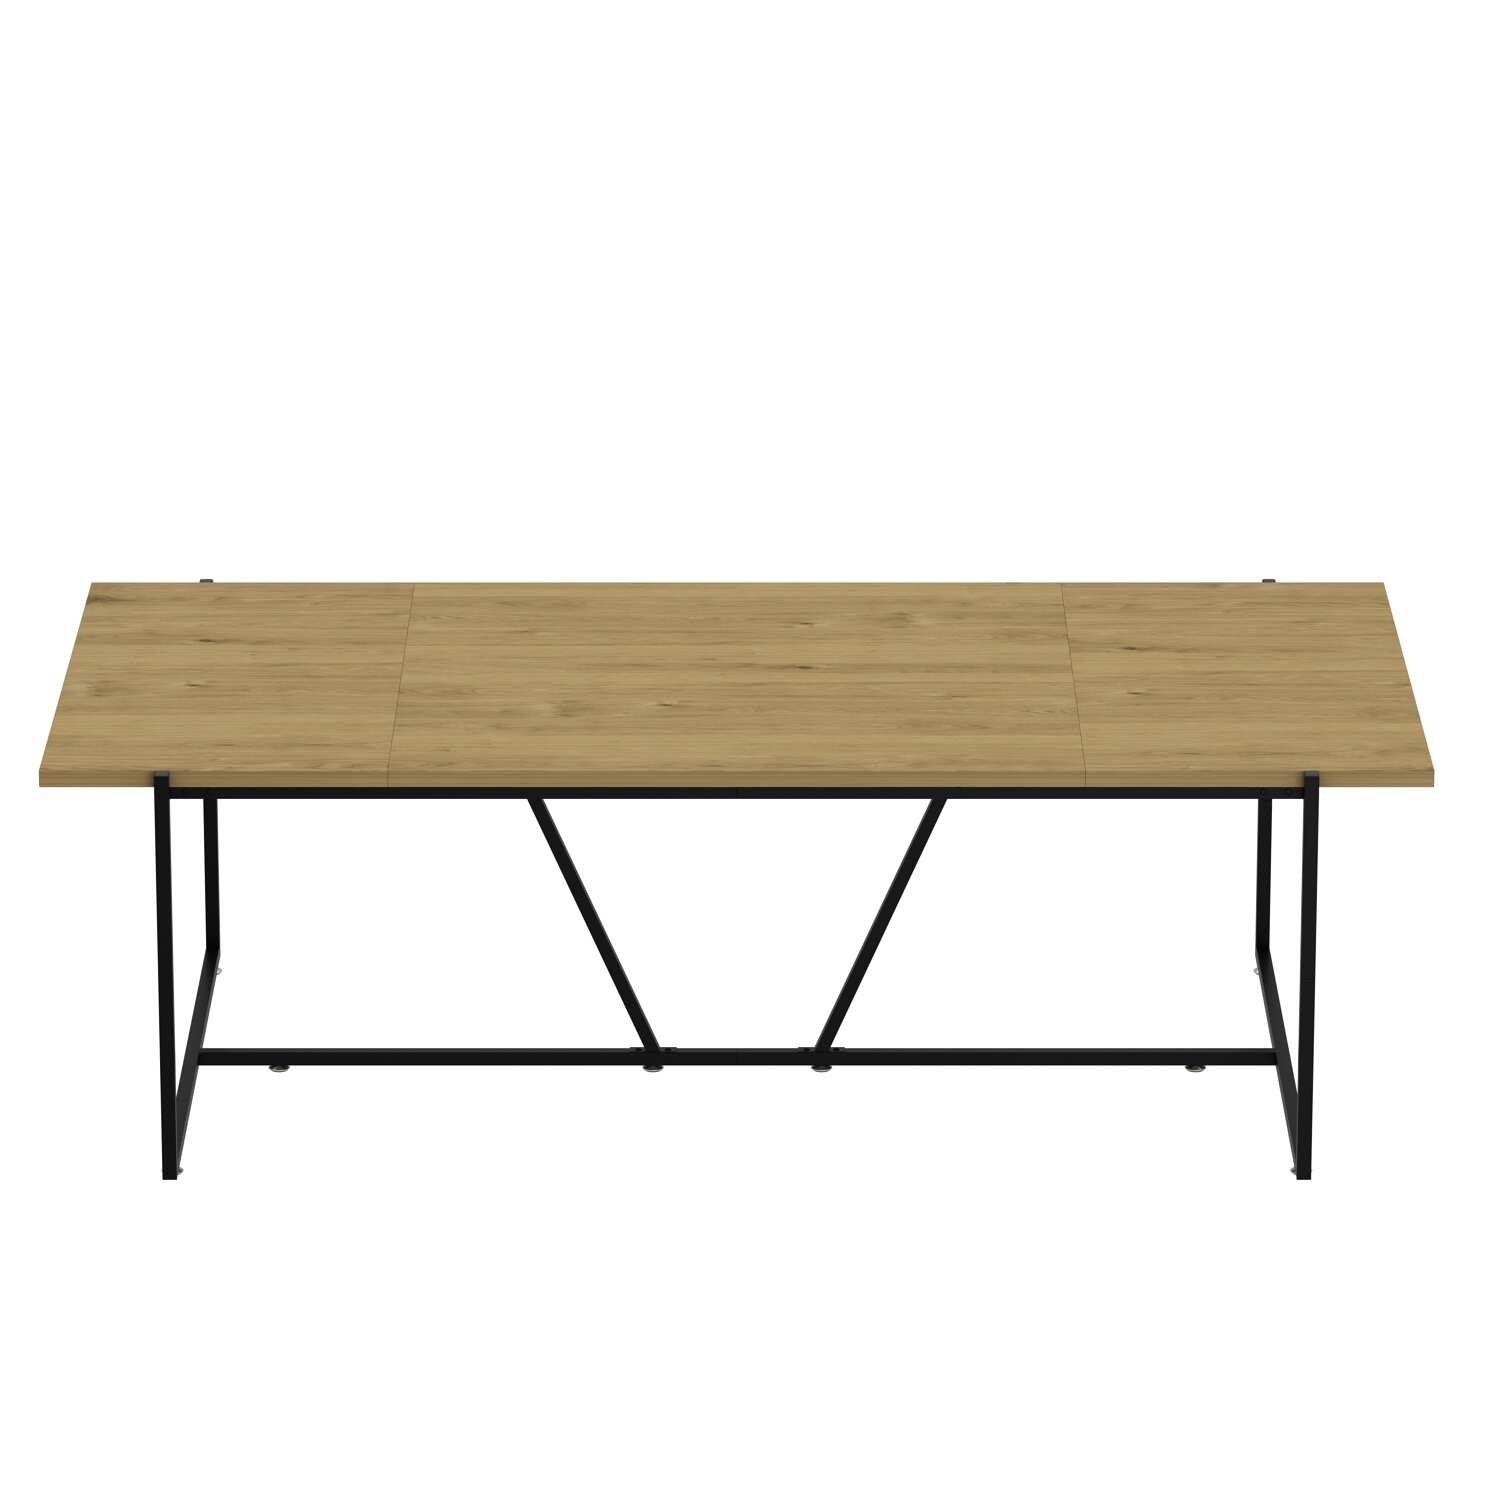 Oversized Work&Gaming Desk Wood Grain Design Meeting Conference Table - 94.5"x49.2"